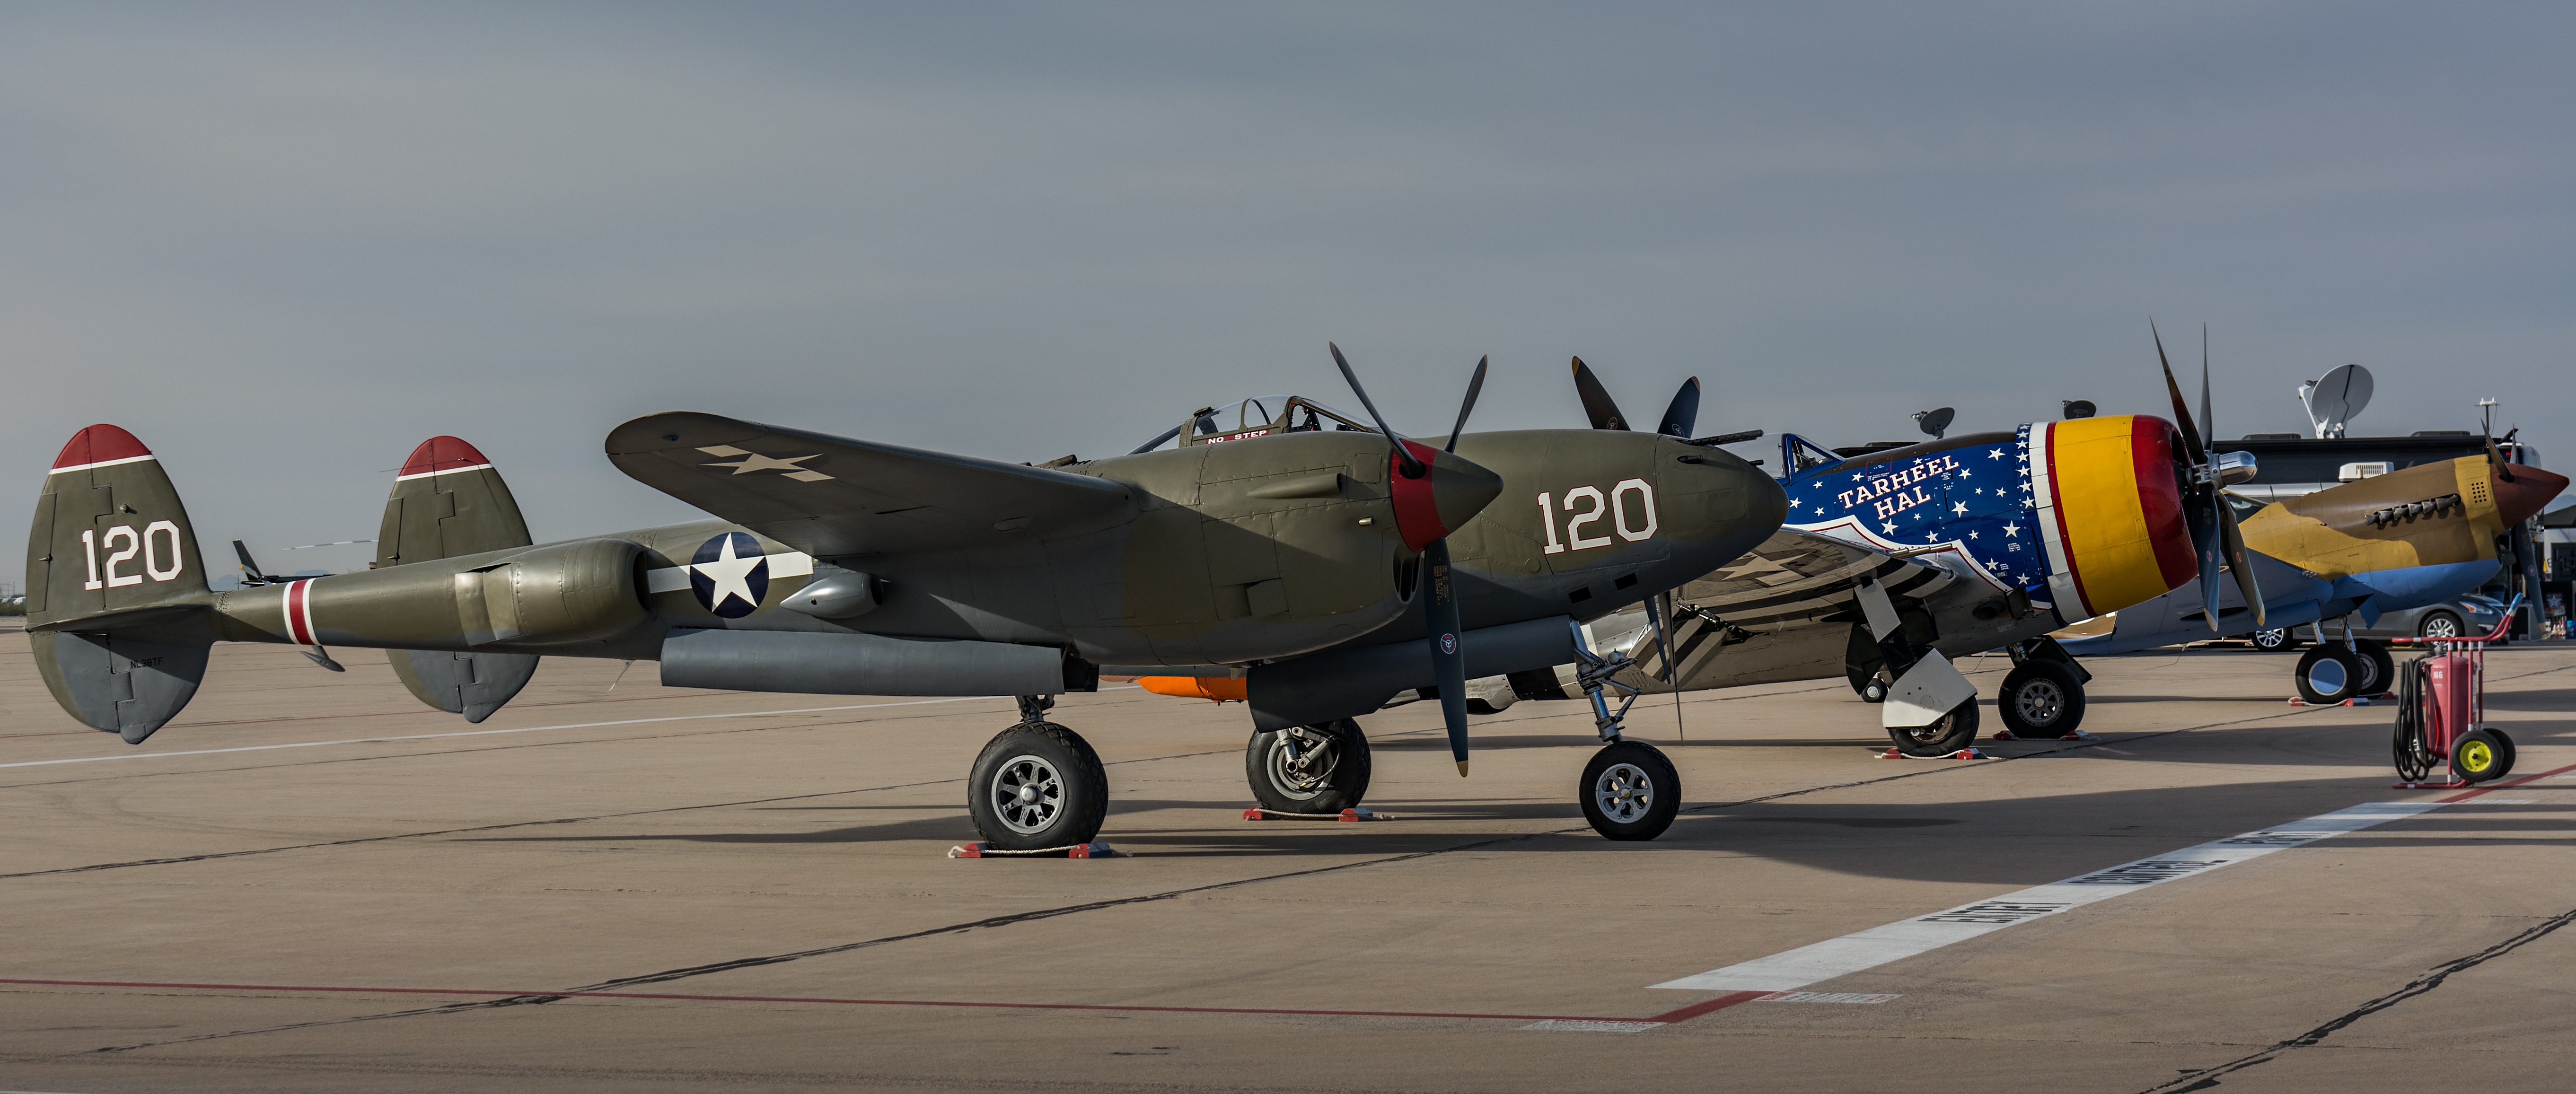 Classic warbirds on the flightline at Davis-Monthan AFB